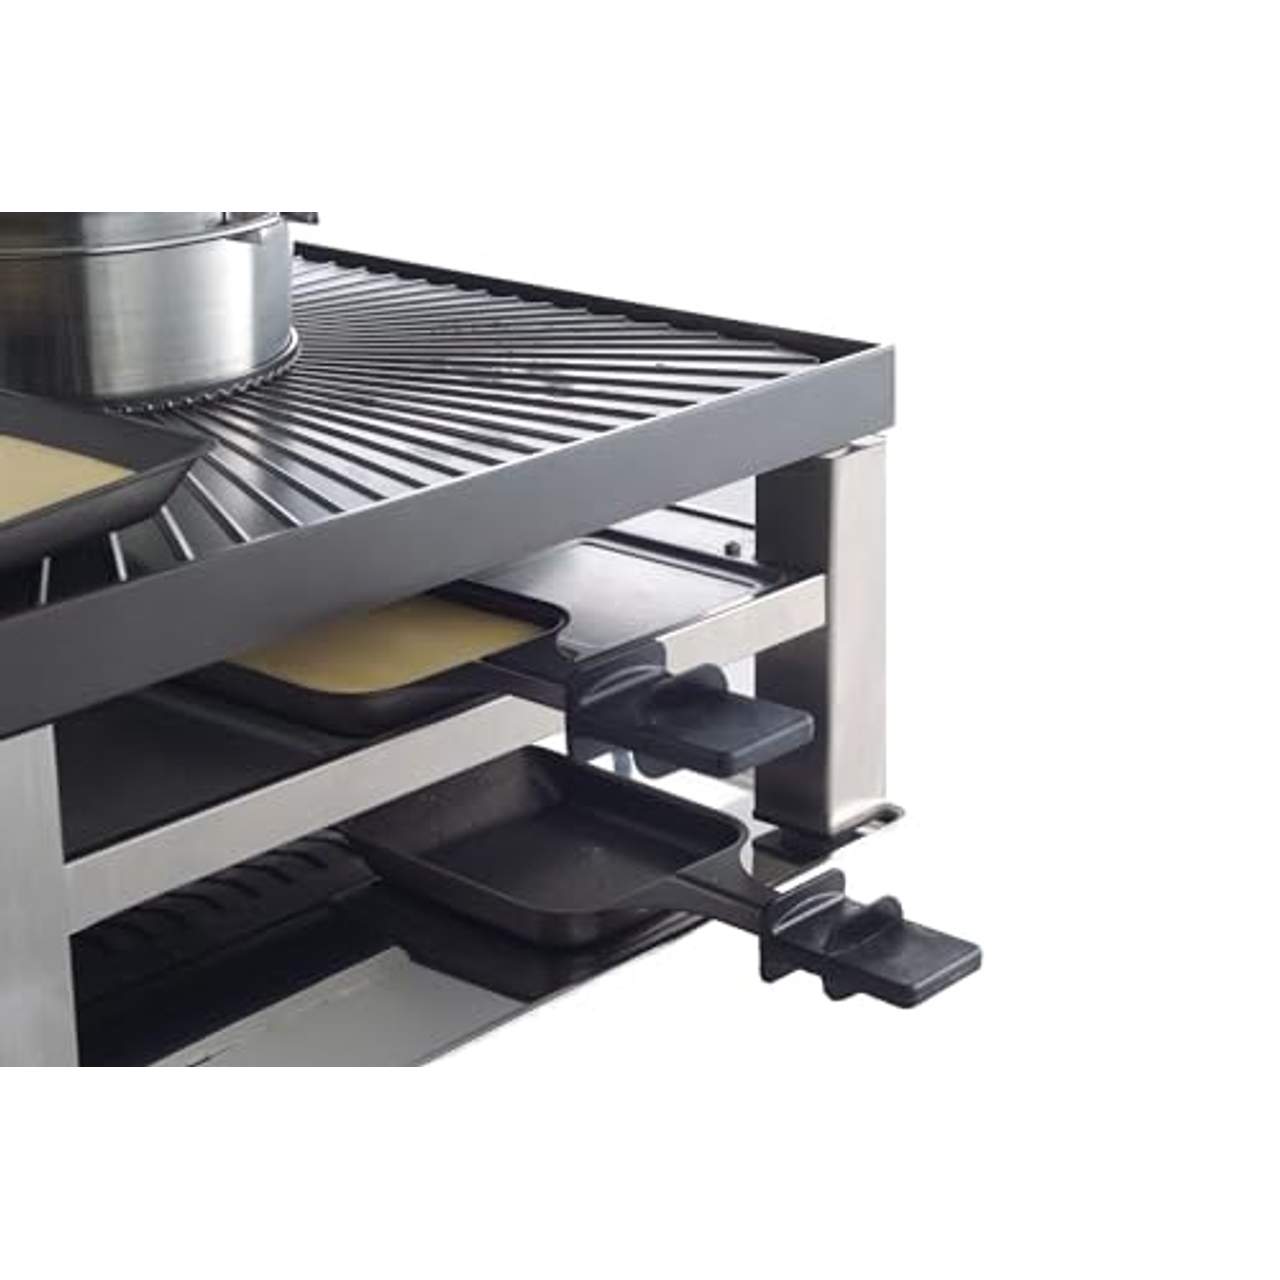 Solis Combi Grill 3 in 1  Raclette 